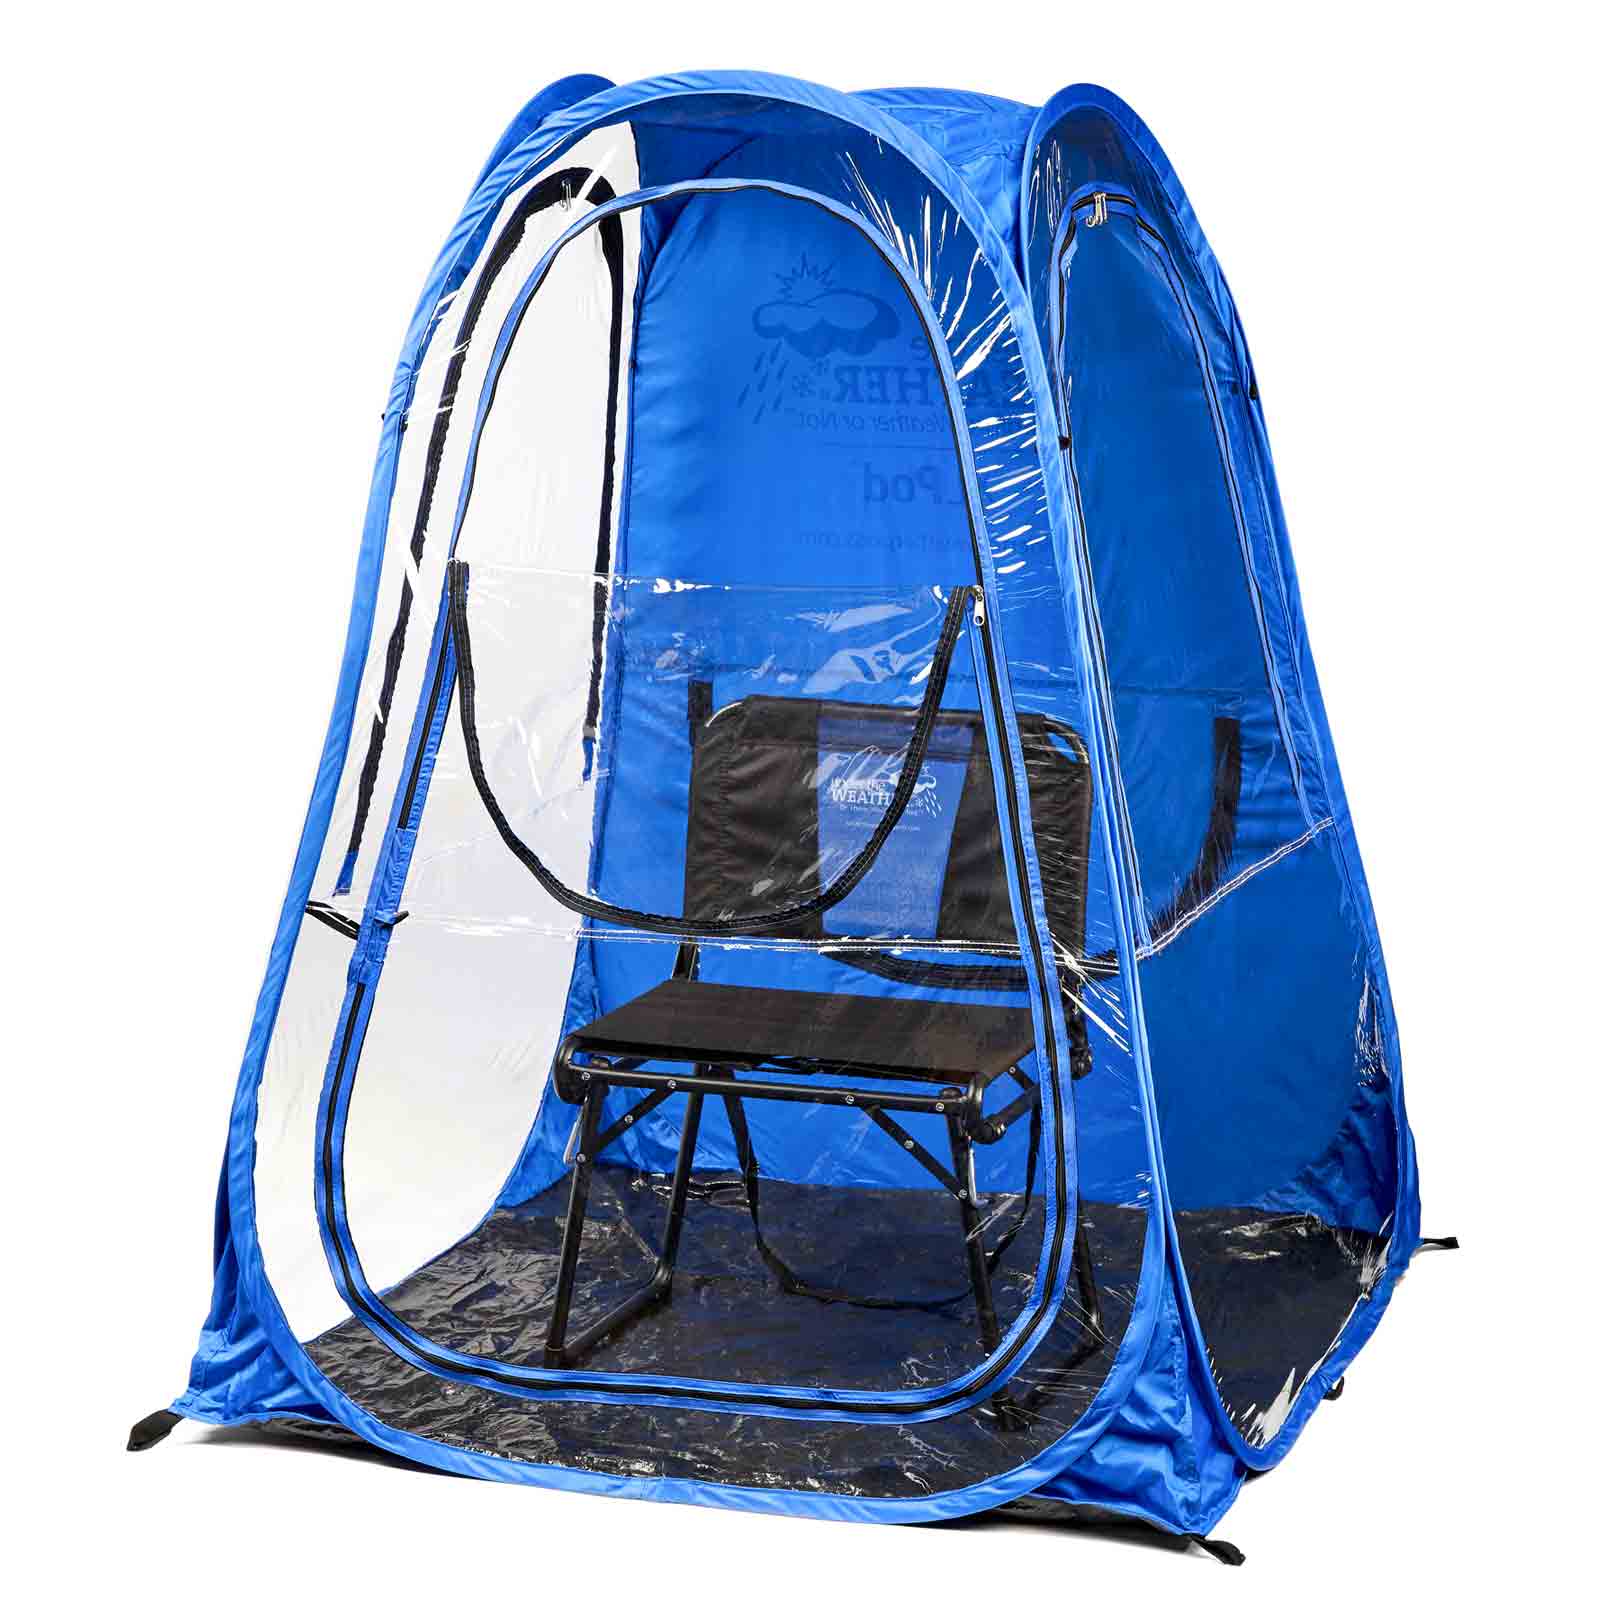 OriginalPod XL 1-Person Pop-up Tent - Royal Blue - Under the Weather® - Personal pop-up sports tent for mom, dad, kids, parents - Perfect for soccer, baseball, softball, football, youth team sports - As Seen on Shark Tank